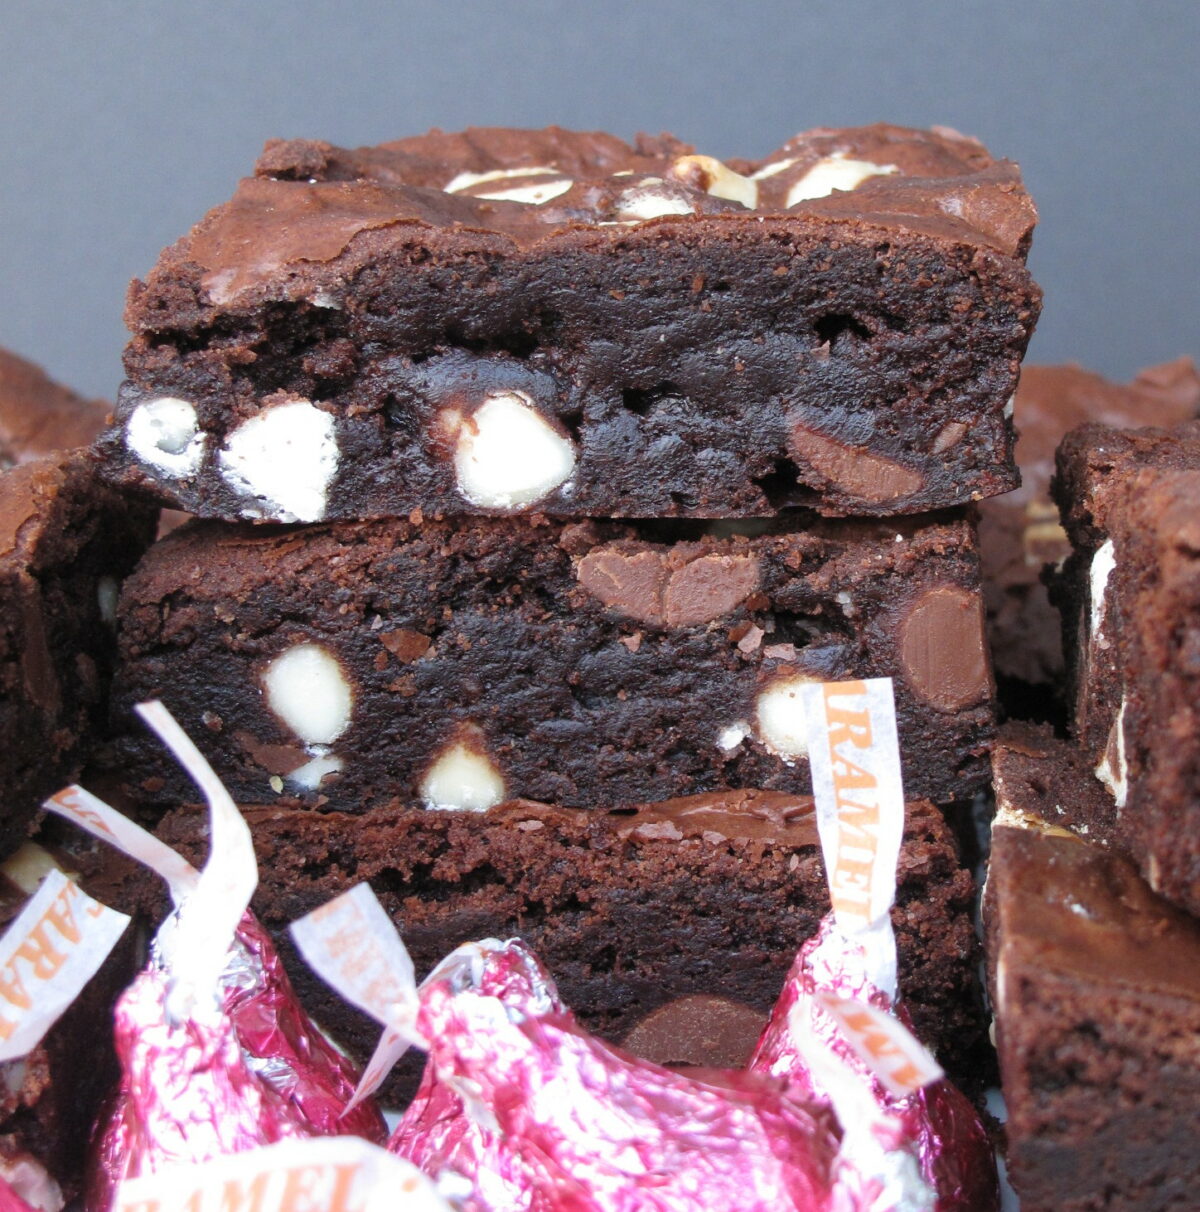 Closeup of cut edges of two stacked brownies with white and milk chocolate chips inside.